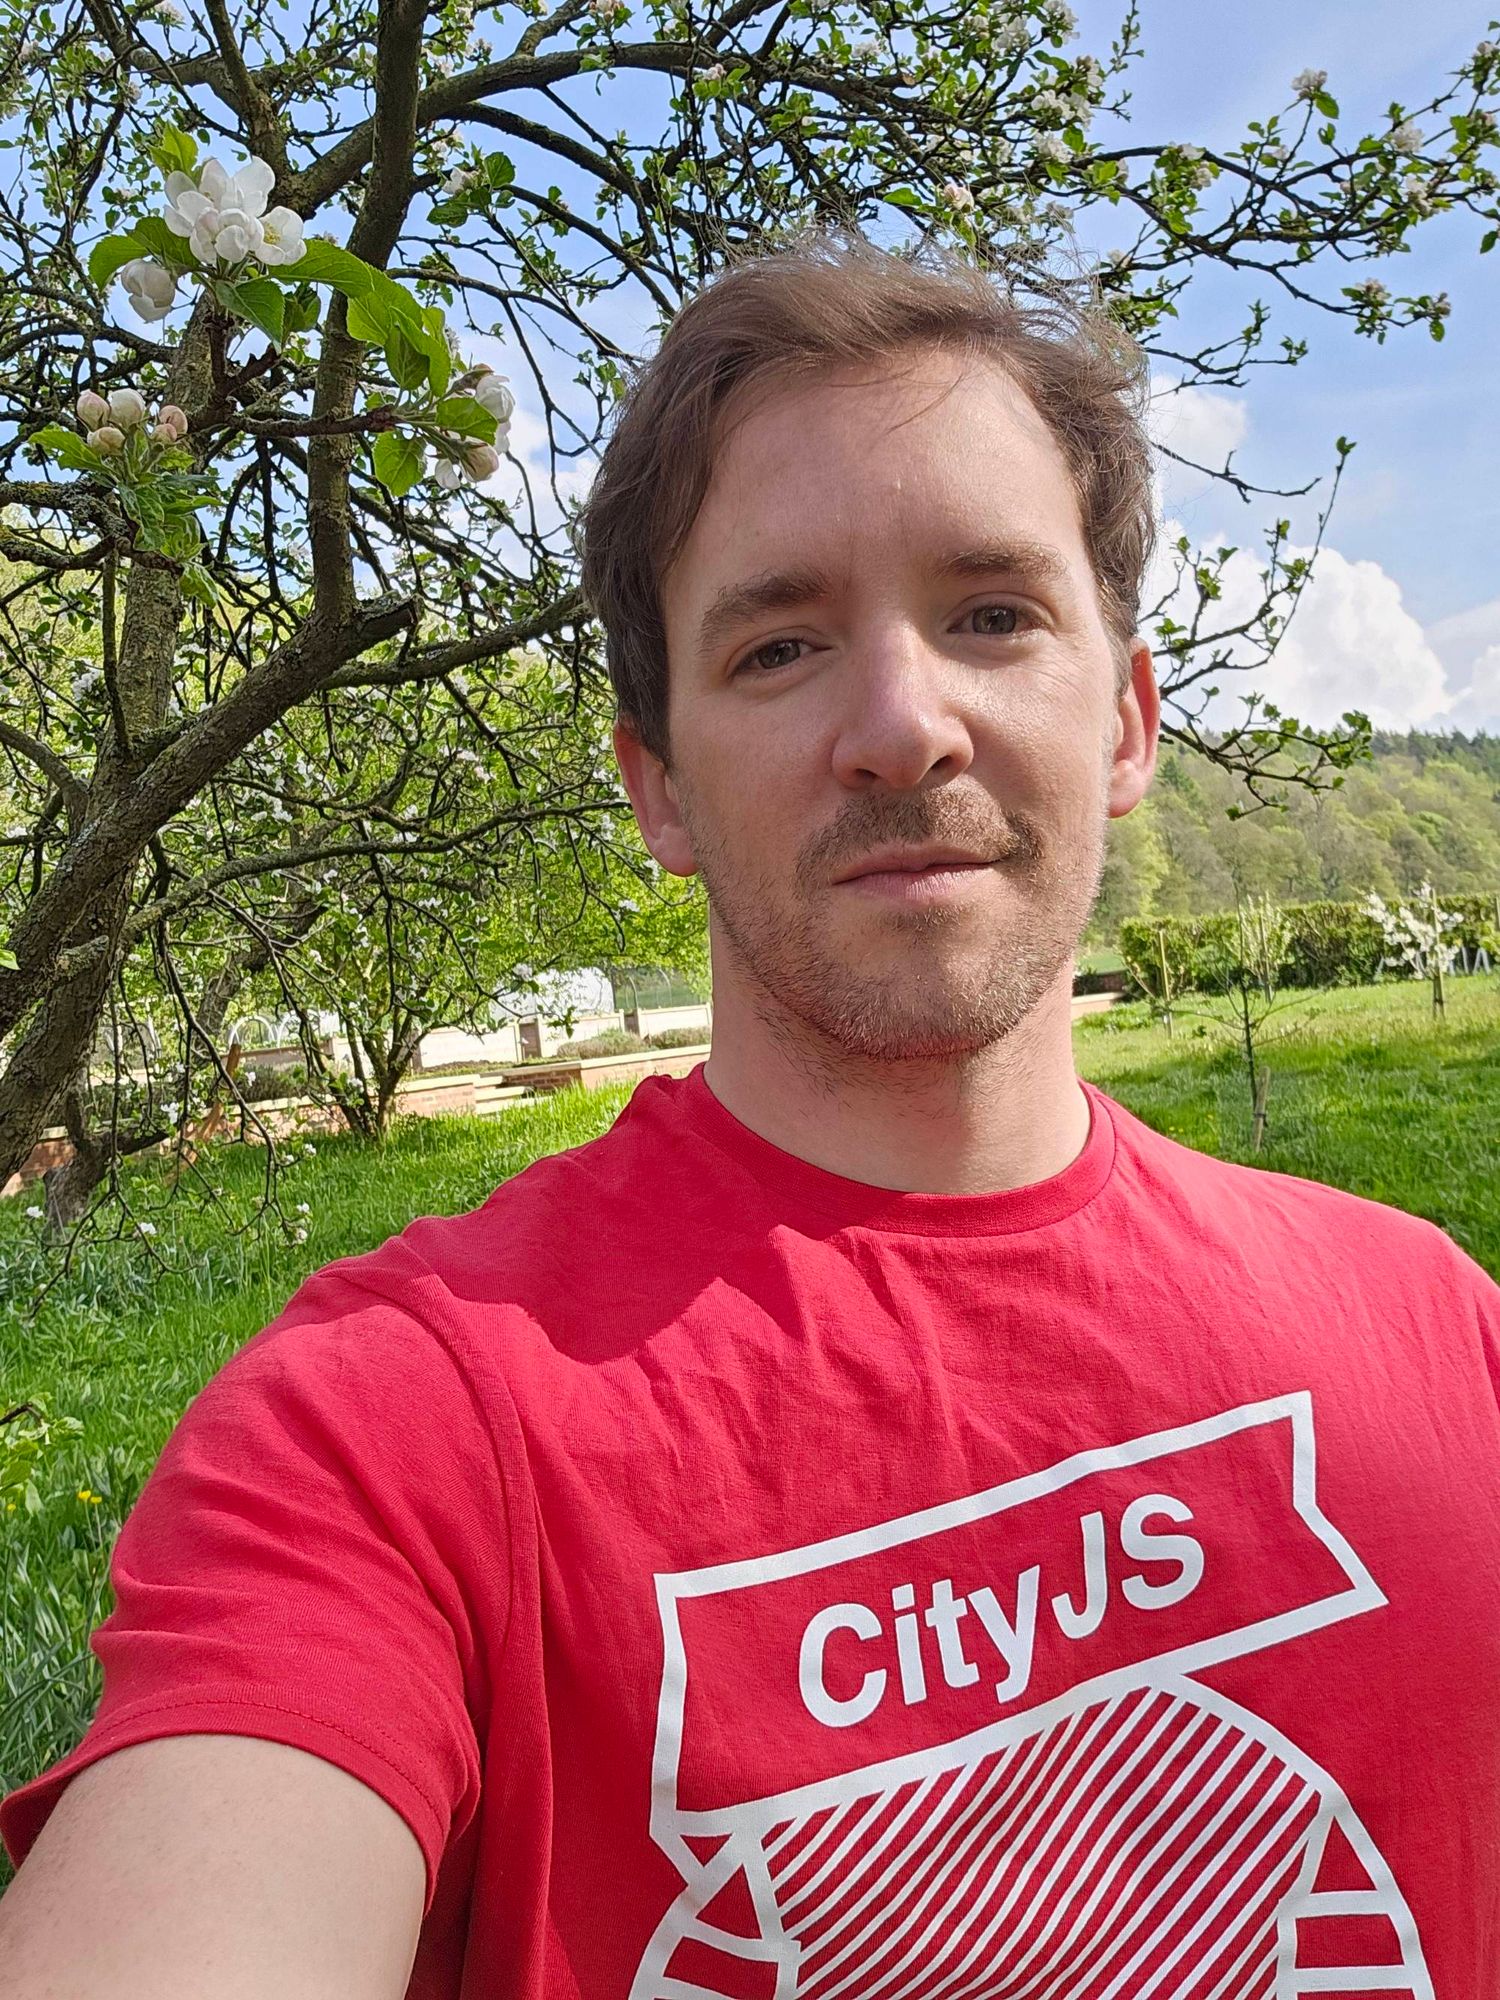 A selfie of me under an apple tree, with blue sky and trees in the background. I'm wearing a red CityJS T-shirt.